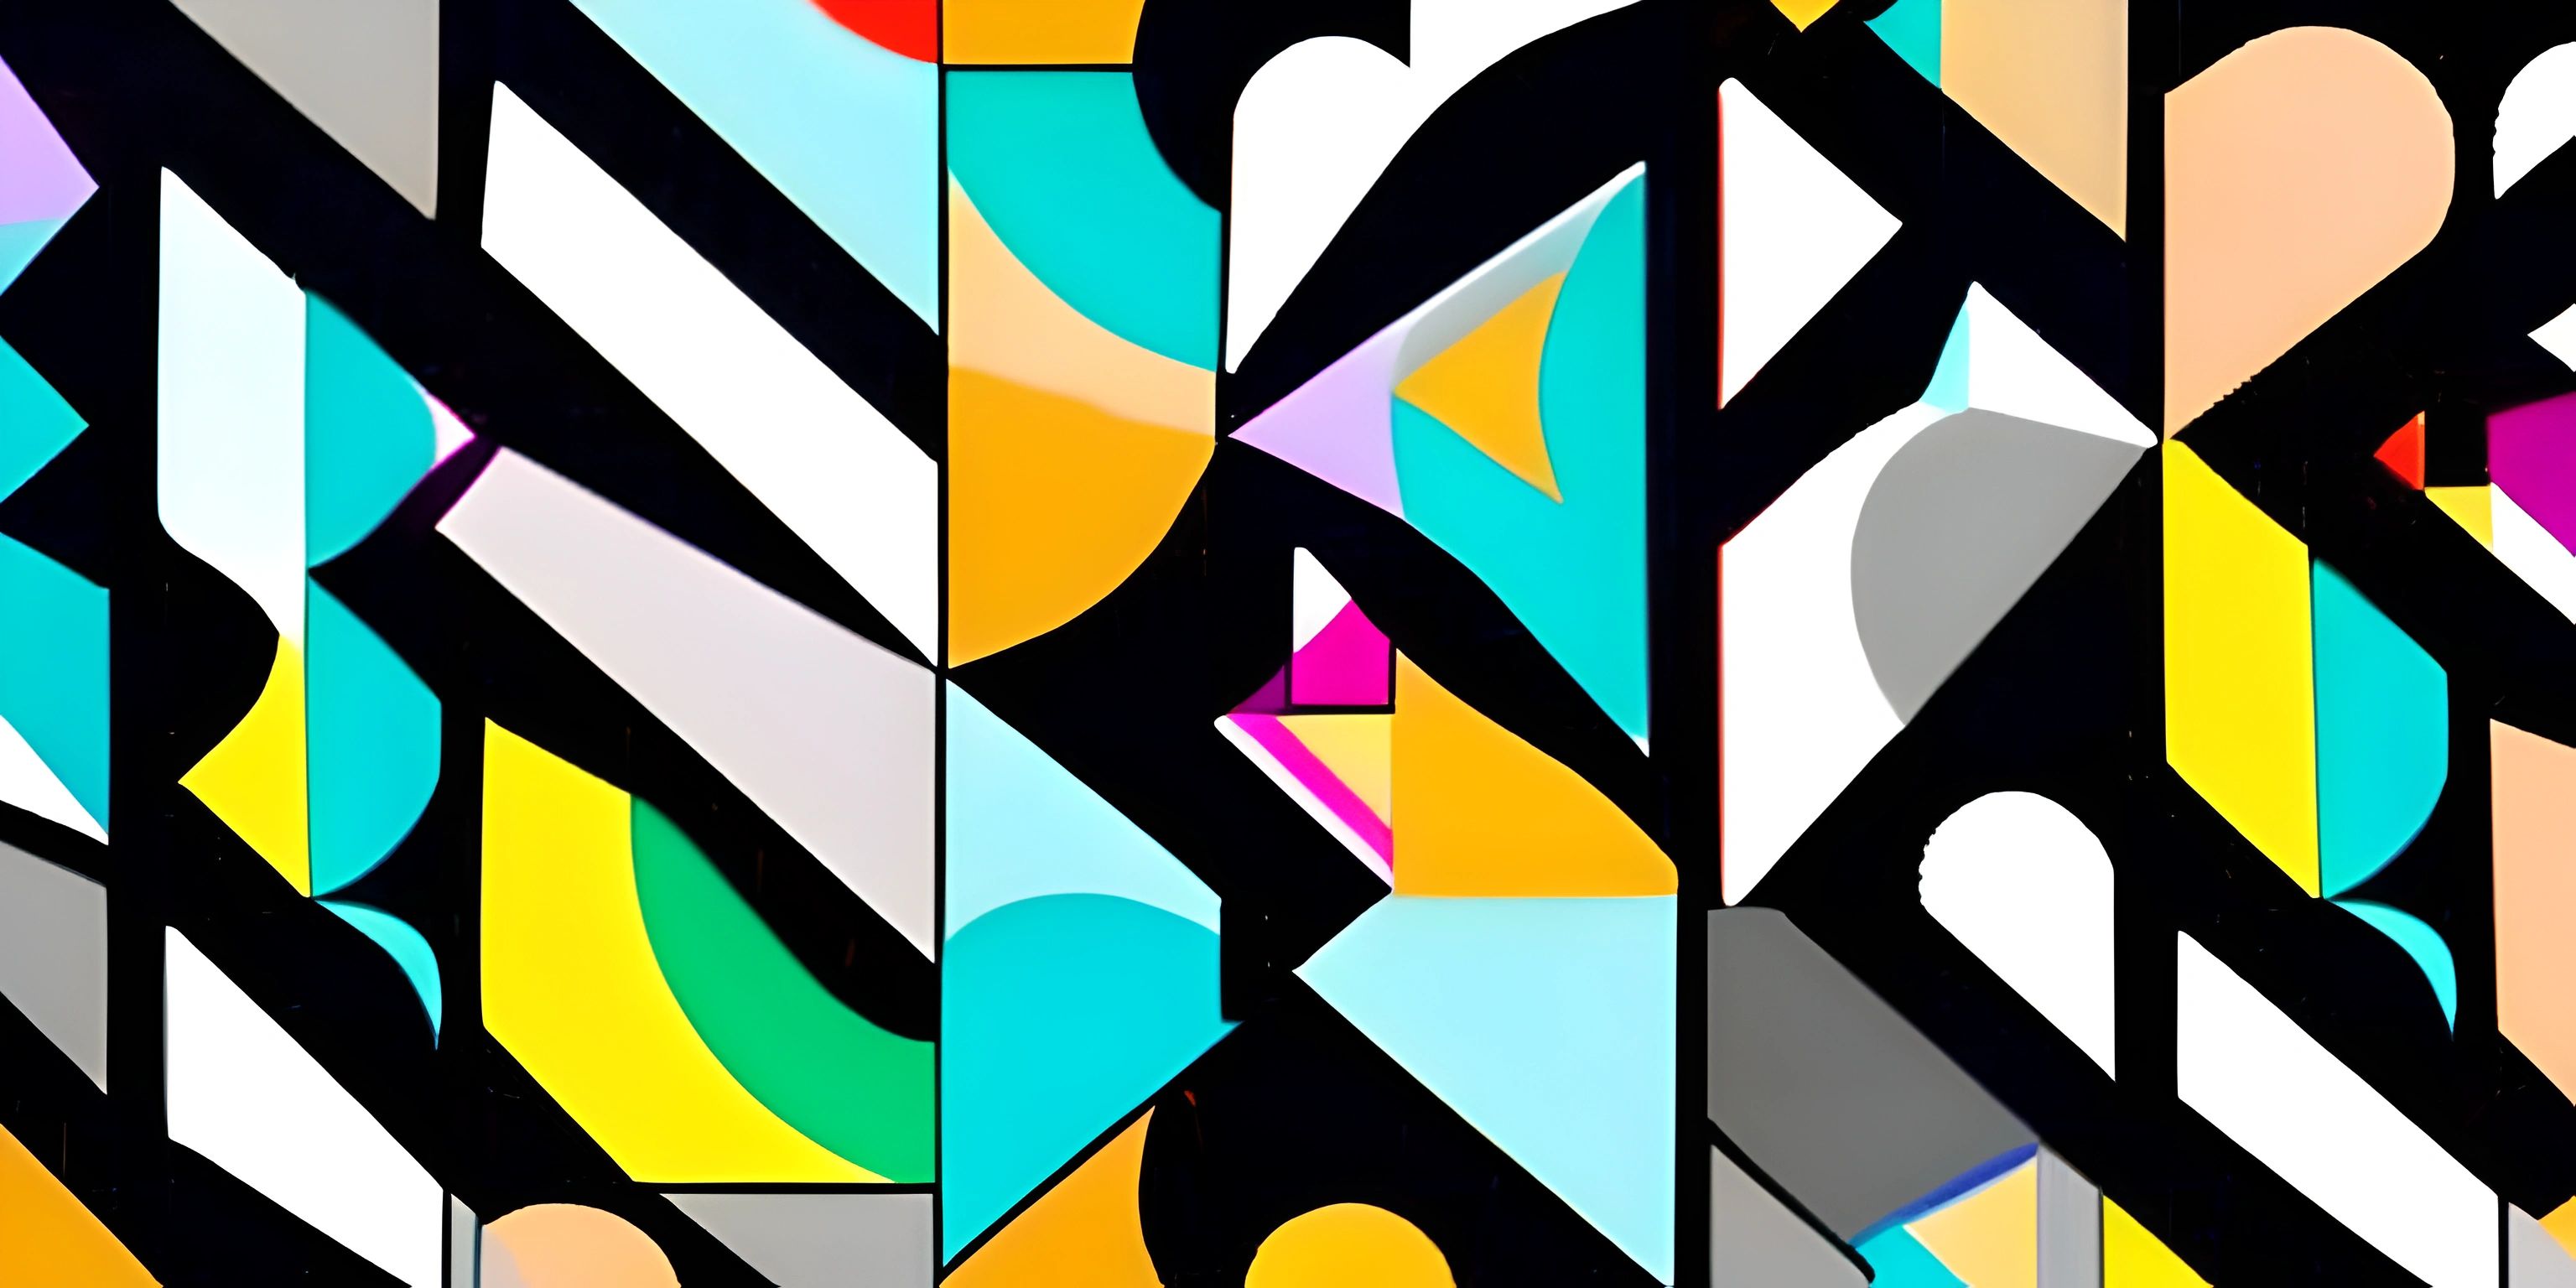 the abstract artwork depicts many colorful shapes on the screen of a phone in various sizes